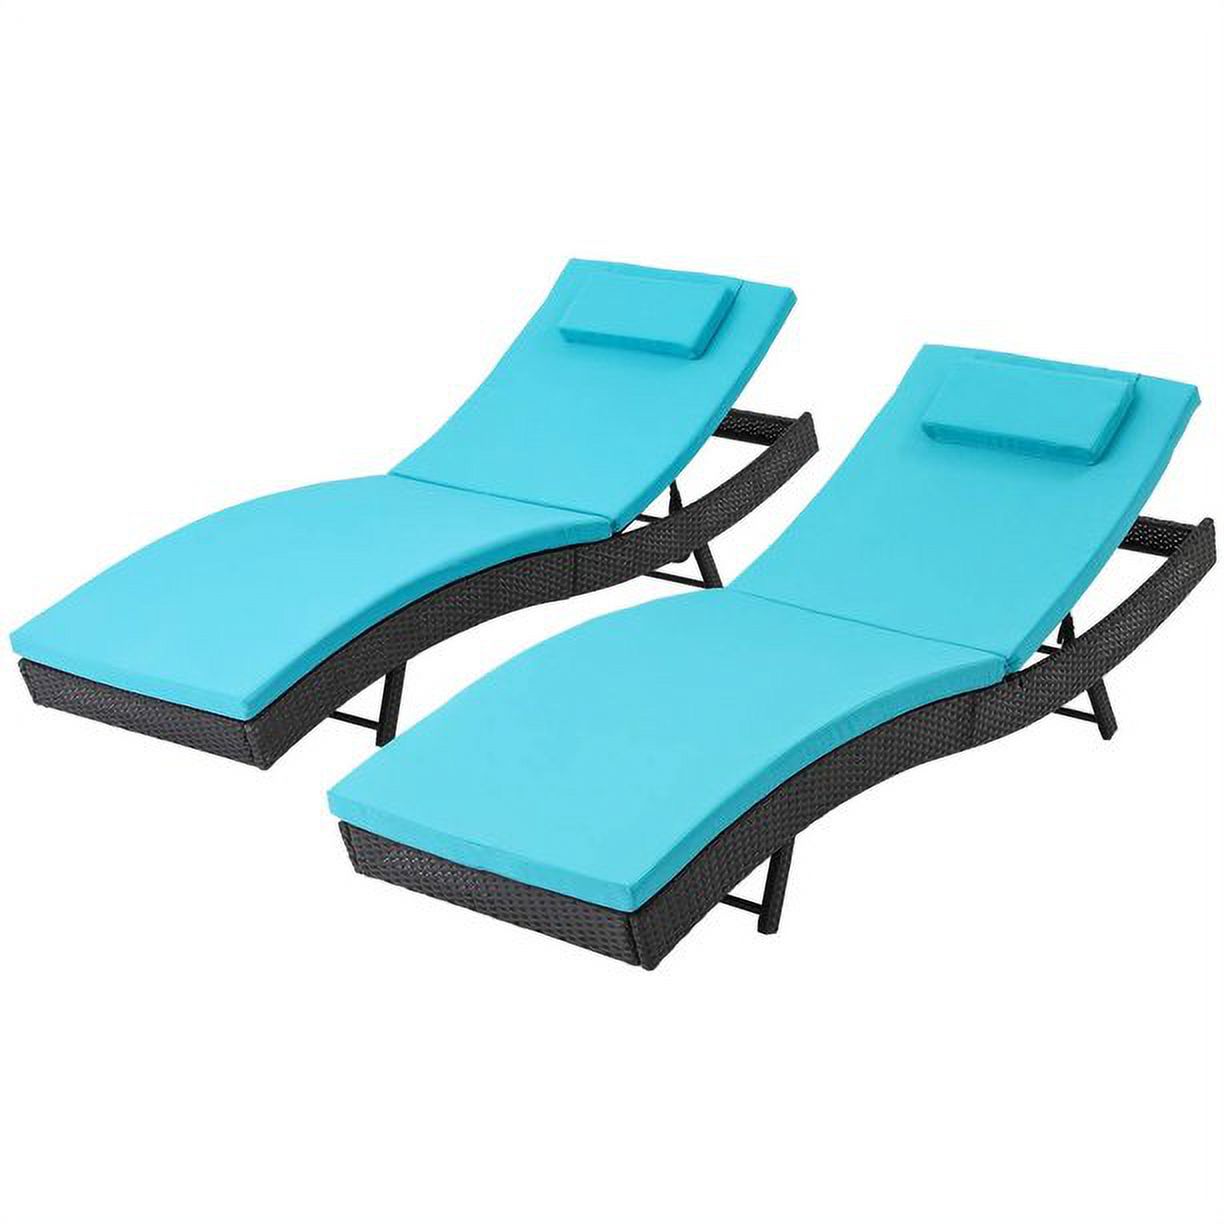 SOLAURA Patio Chaise Lounge Adjustable Black Wicker Reclining Chairs Set of 2 with Blue Cushions - image 3 of 6